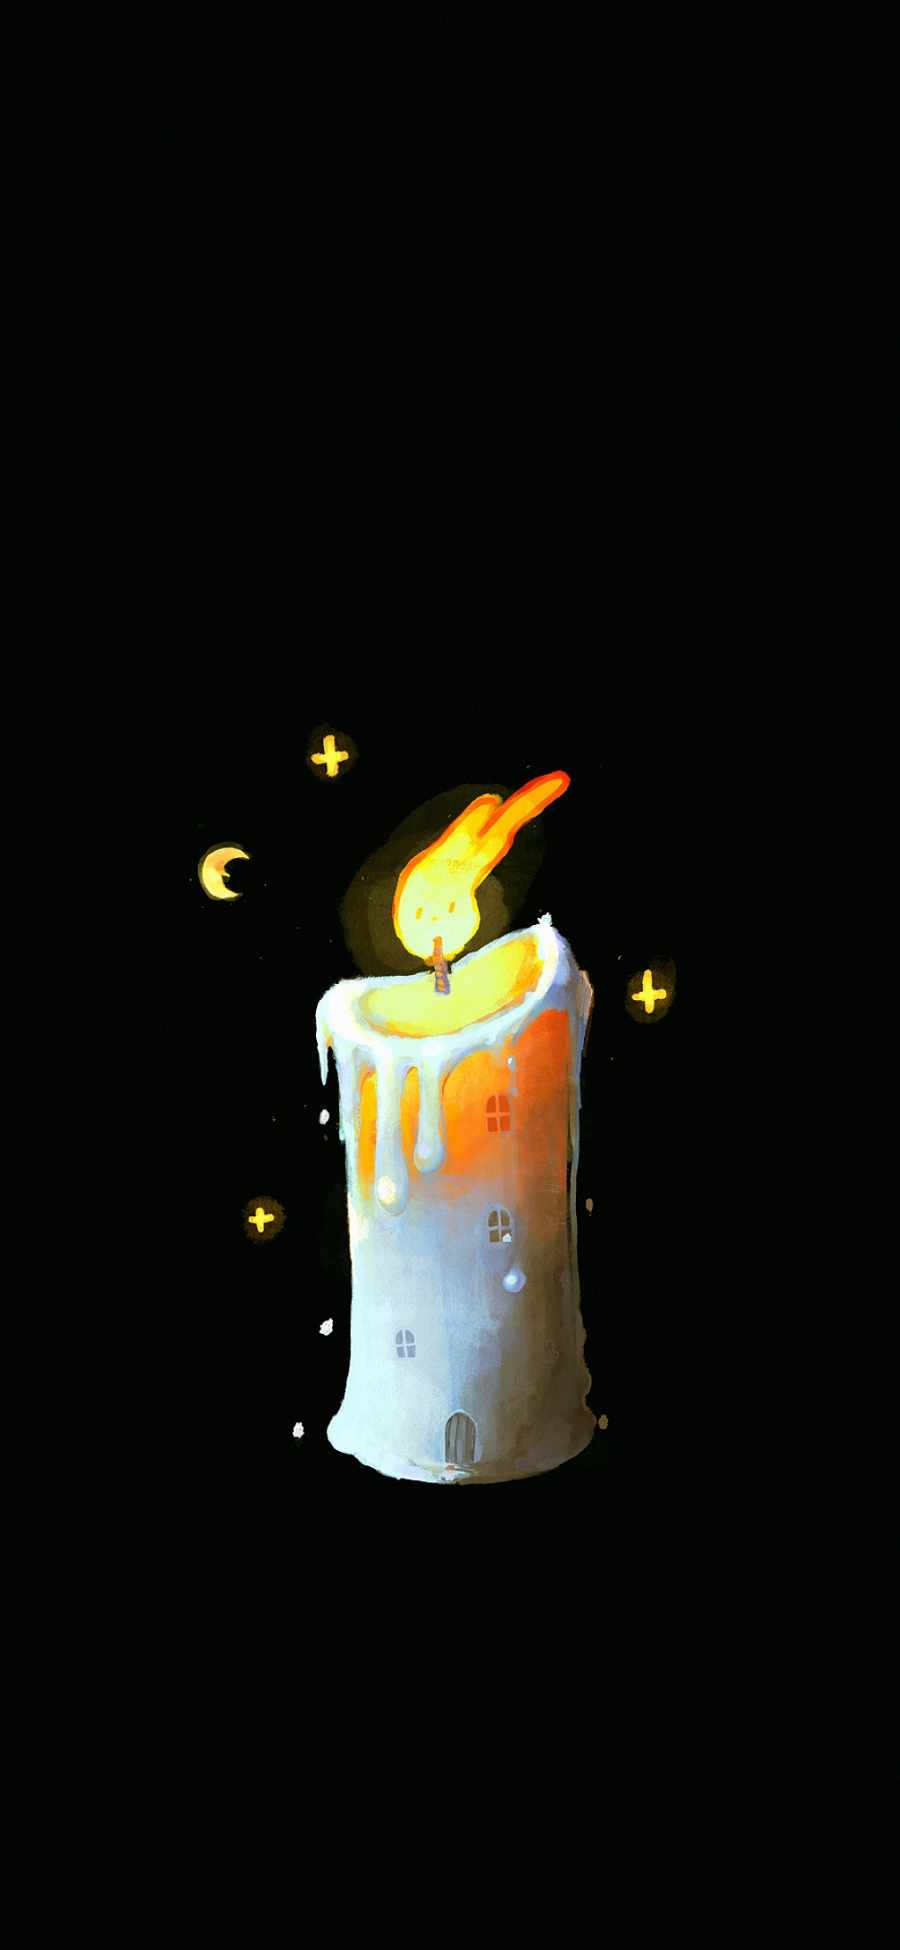 Night Candle HD IPhone Wallpaper  IPhone Wallpapers